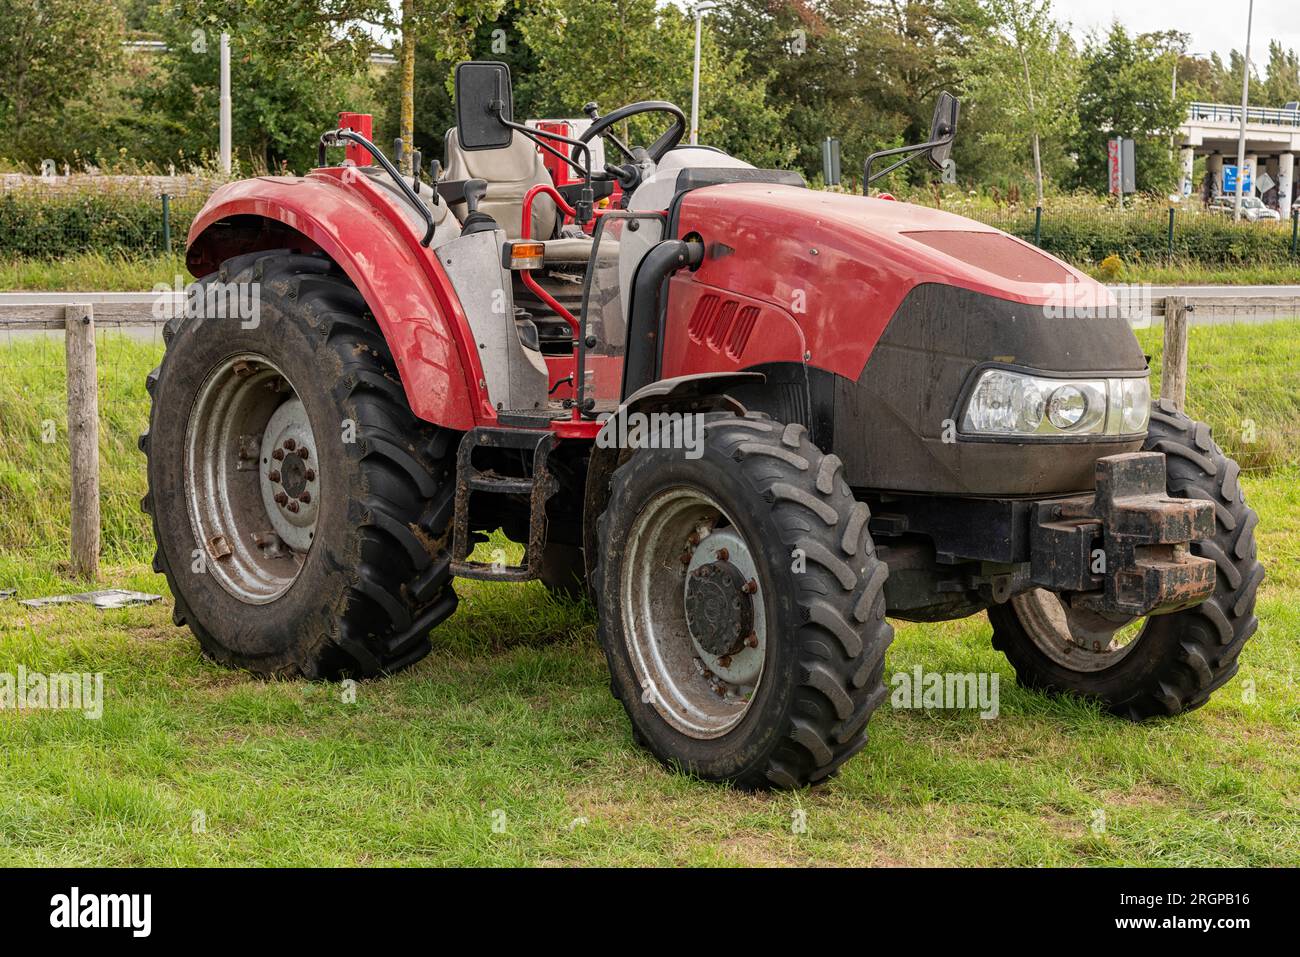 CASE IH 75c farmall tractor is parked outside in a field Stock Photo